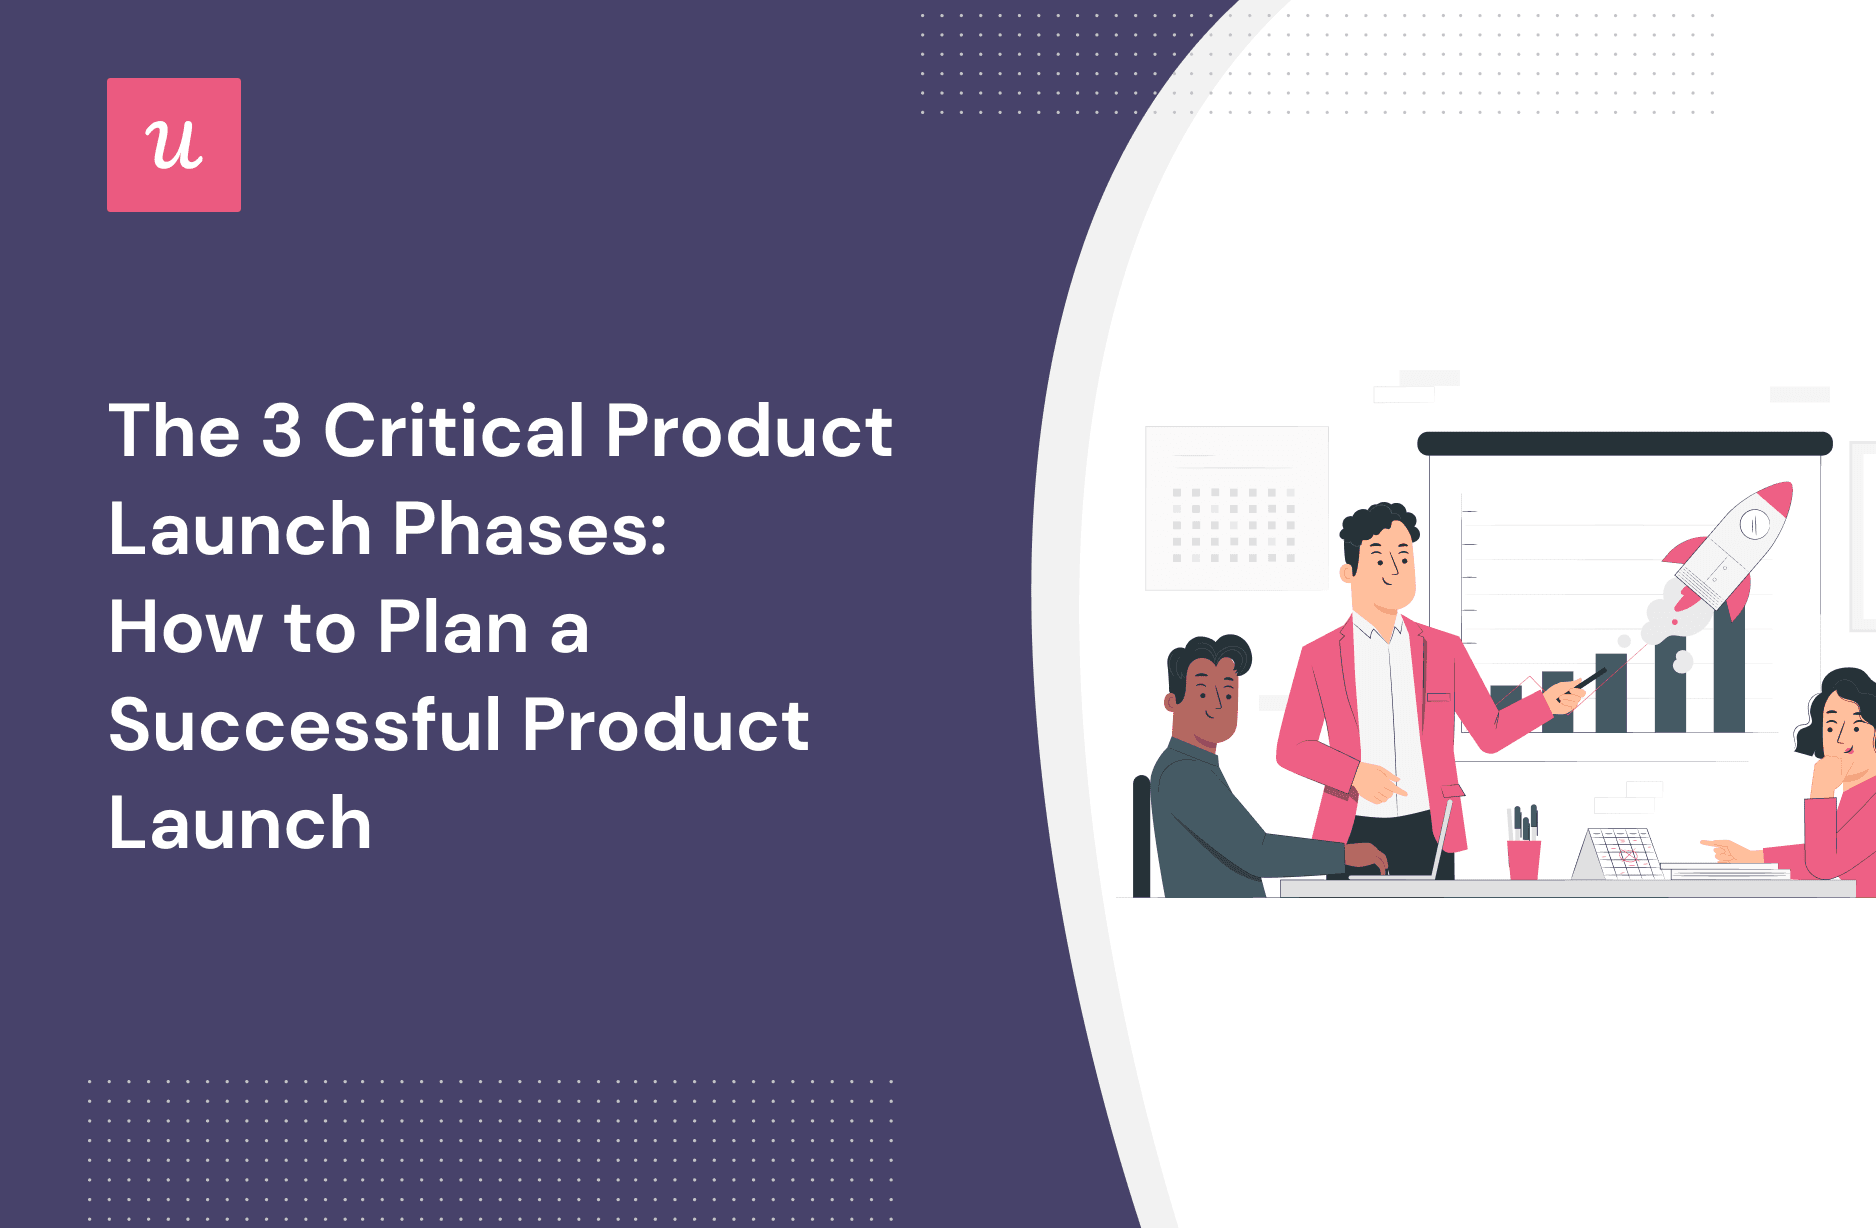 The 3 Critical Product Launch Phases: How to Plan a Successful Product Launch cover